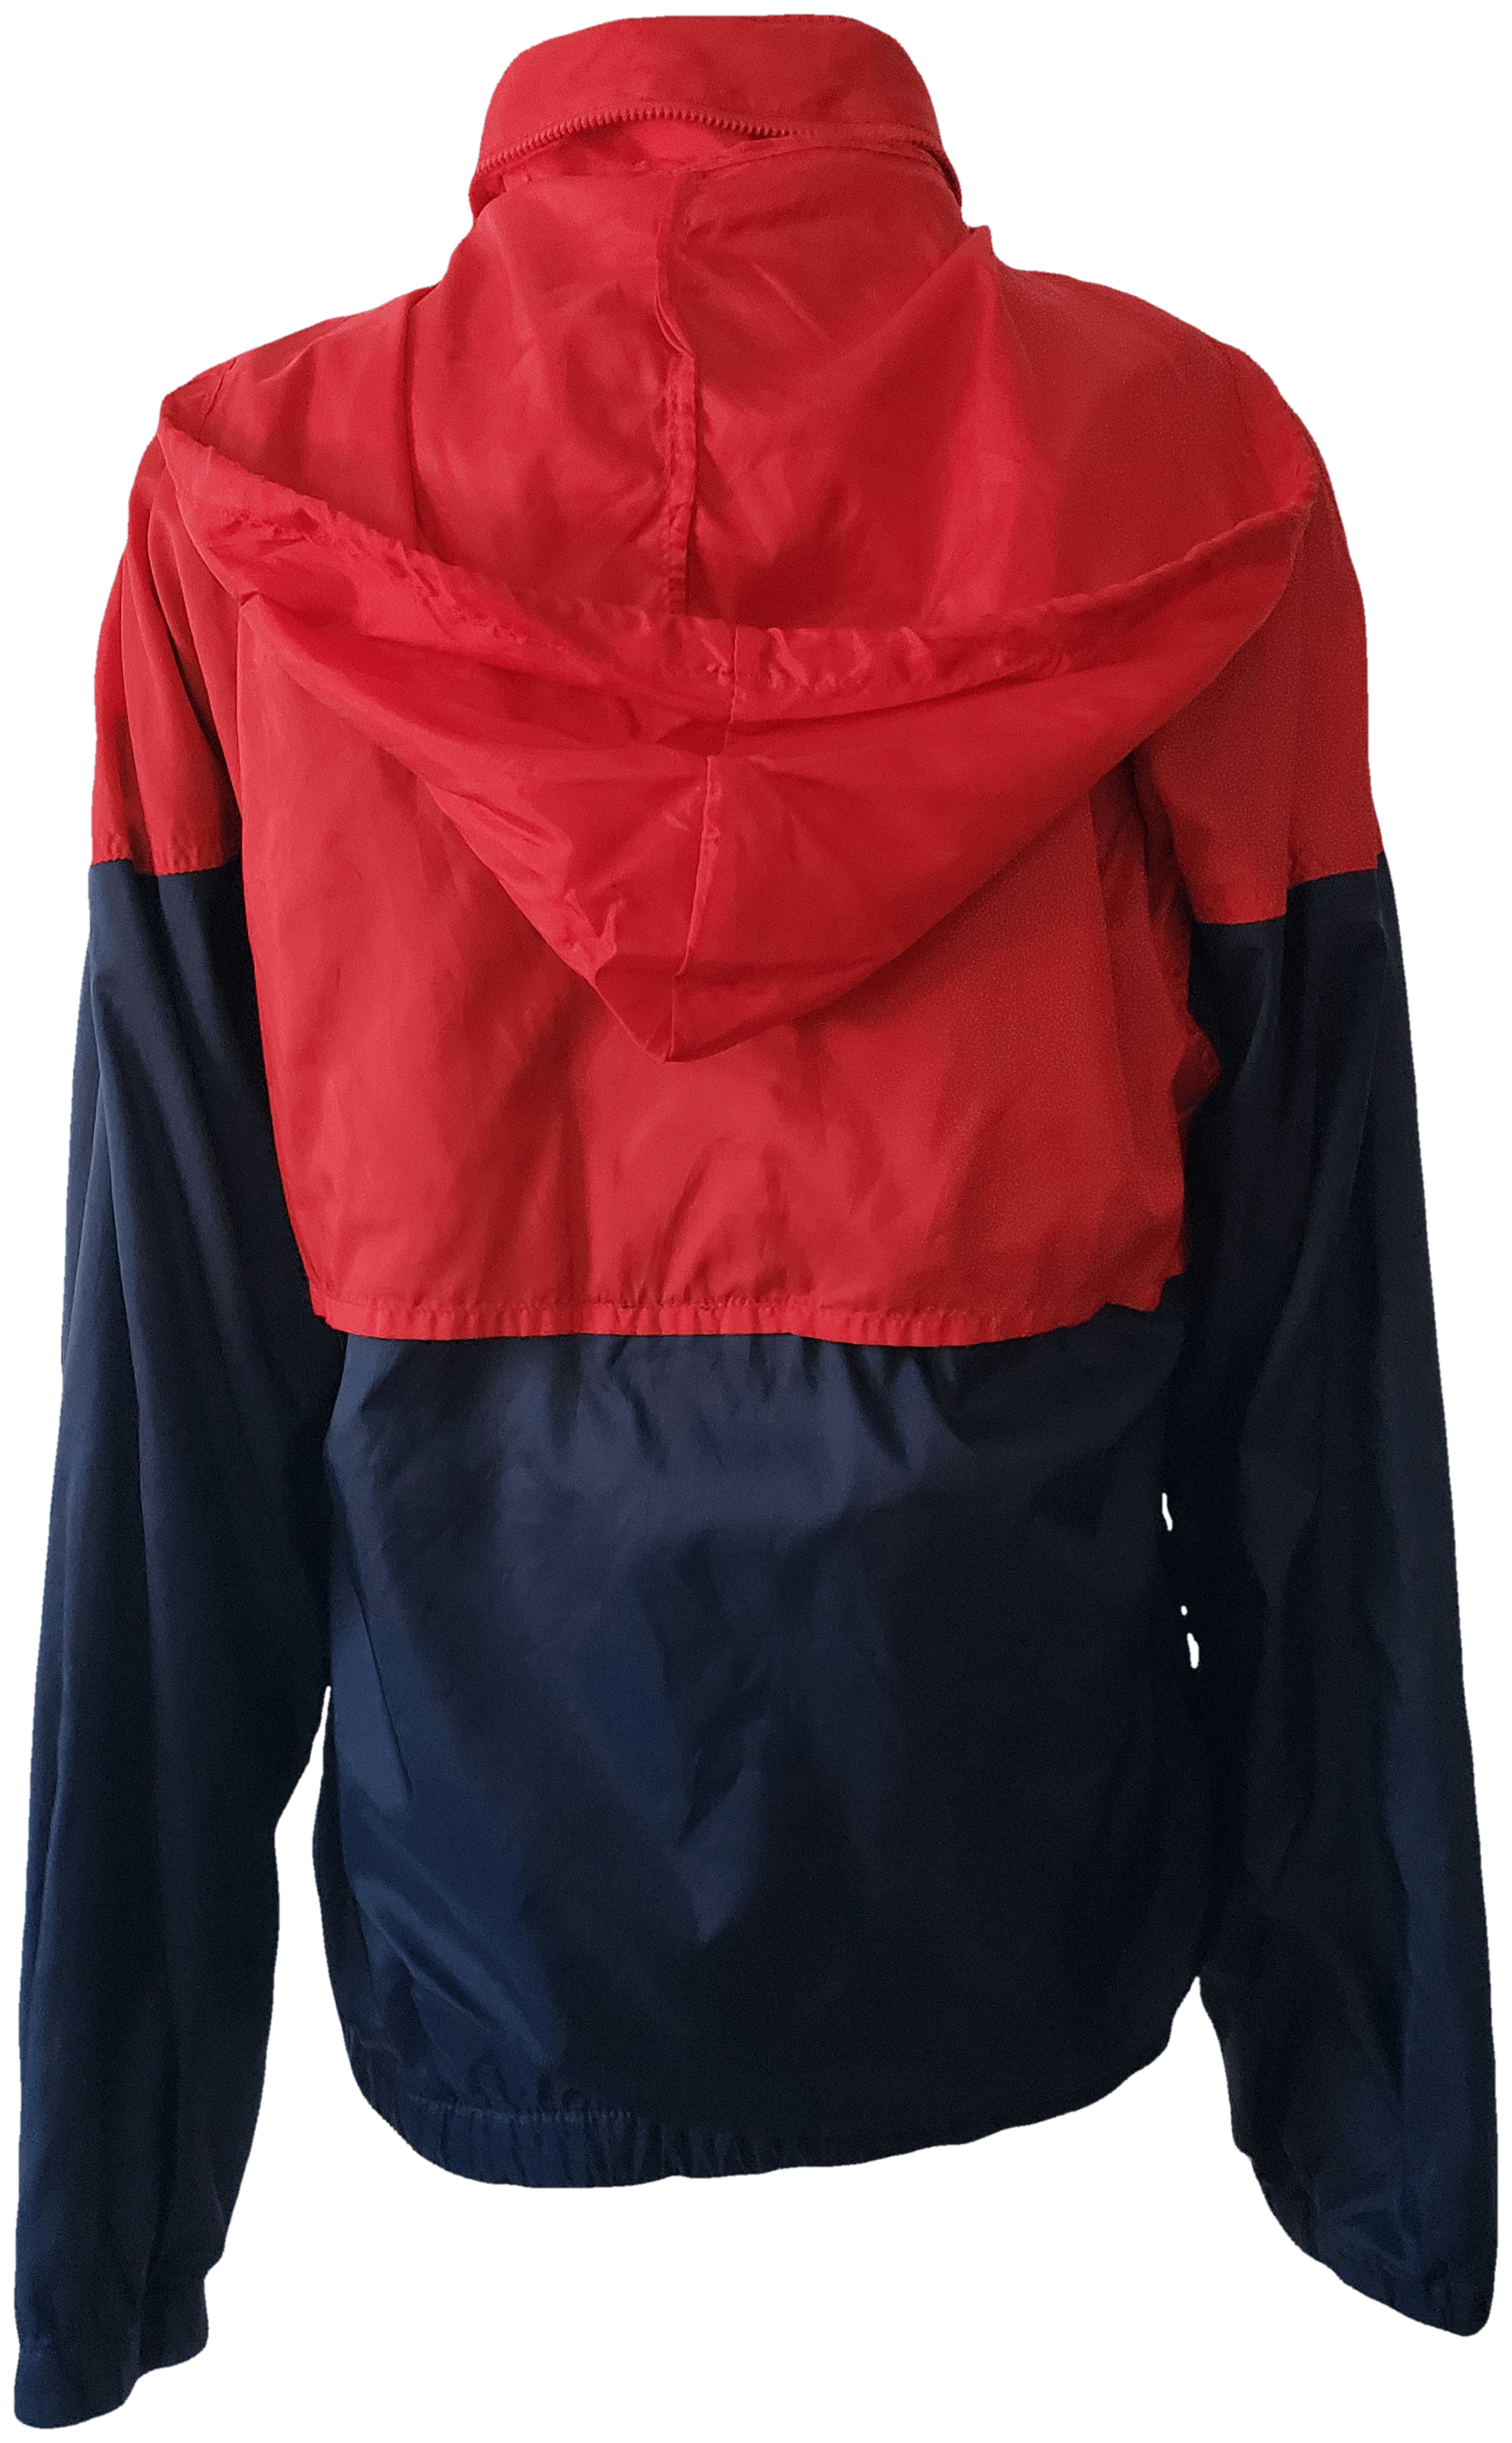 adidas red white and blue windbreaker